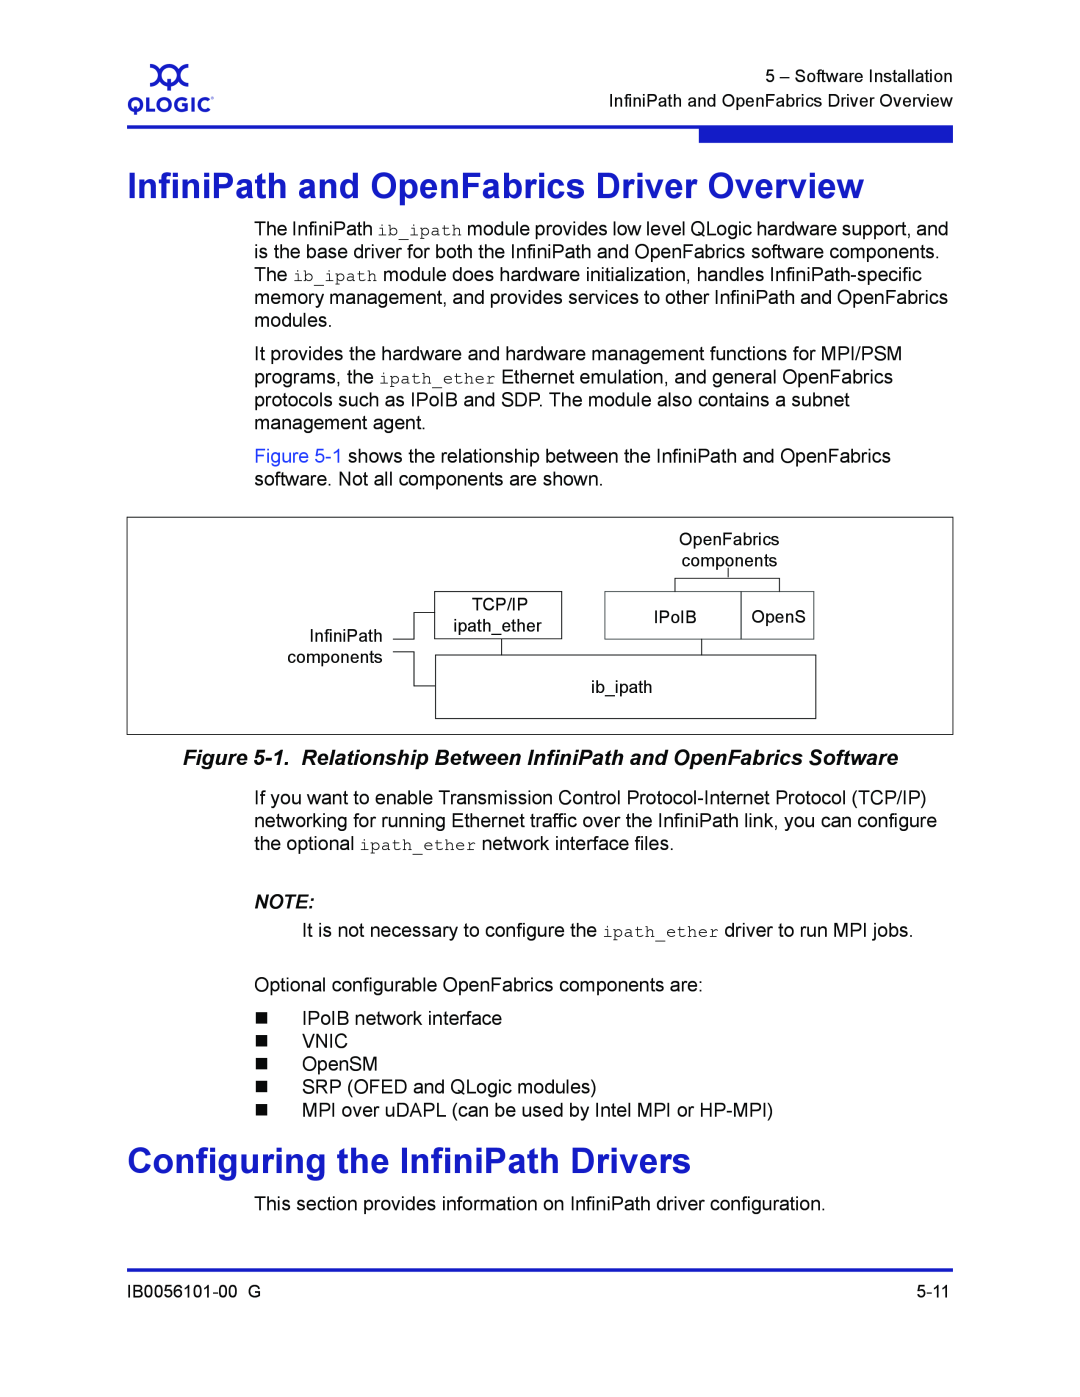 Q-Logic IB0056101-00 G manual InfiniPath and OpenFabrics Driver Overview, Configuring the InfiniPath Drivers 